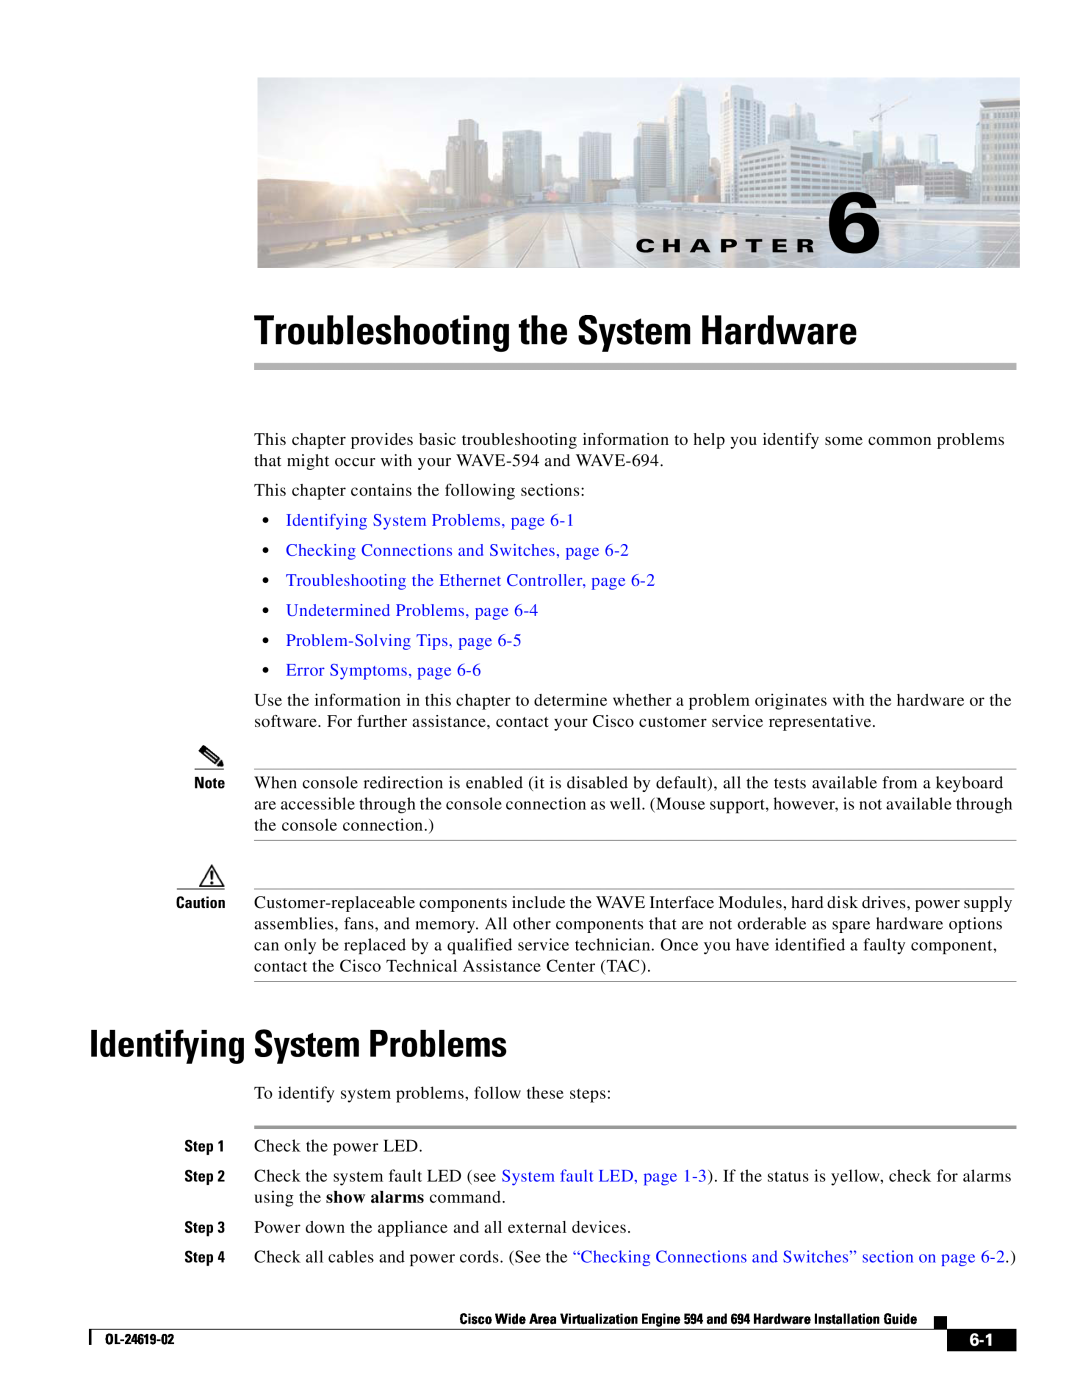 Cisco Systems 694 manual Troubleshooting the System Hardware, Identifying System Problems, page, Error Symptoms, page 